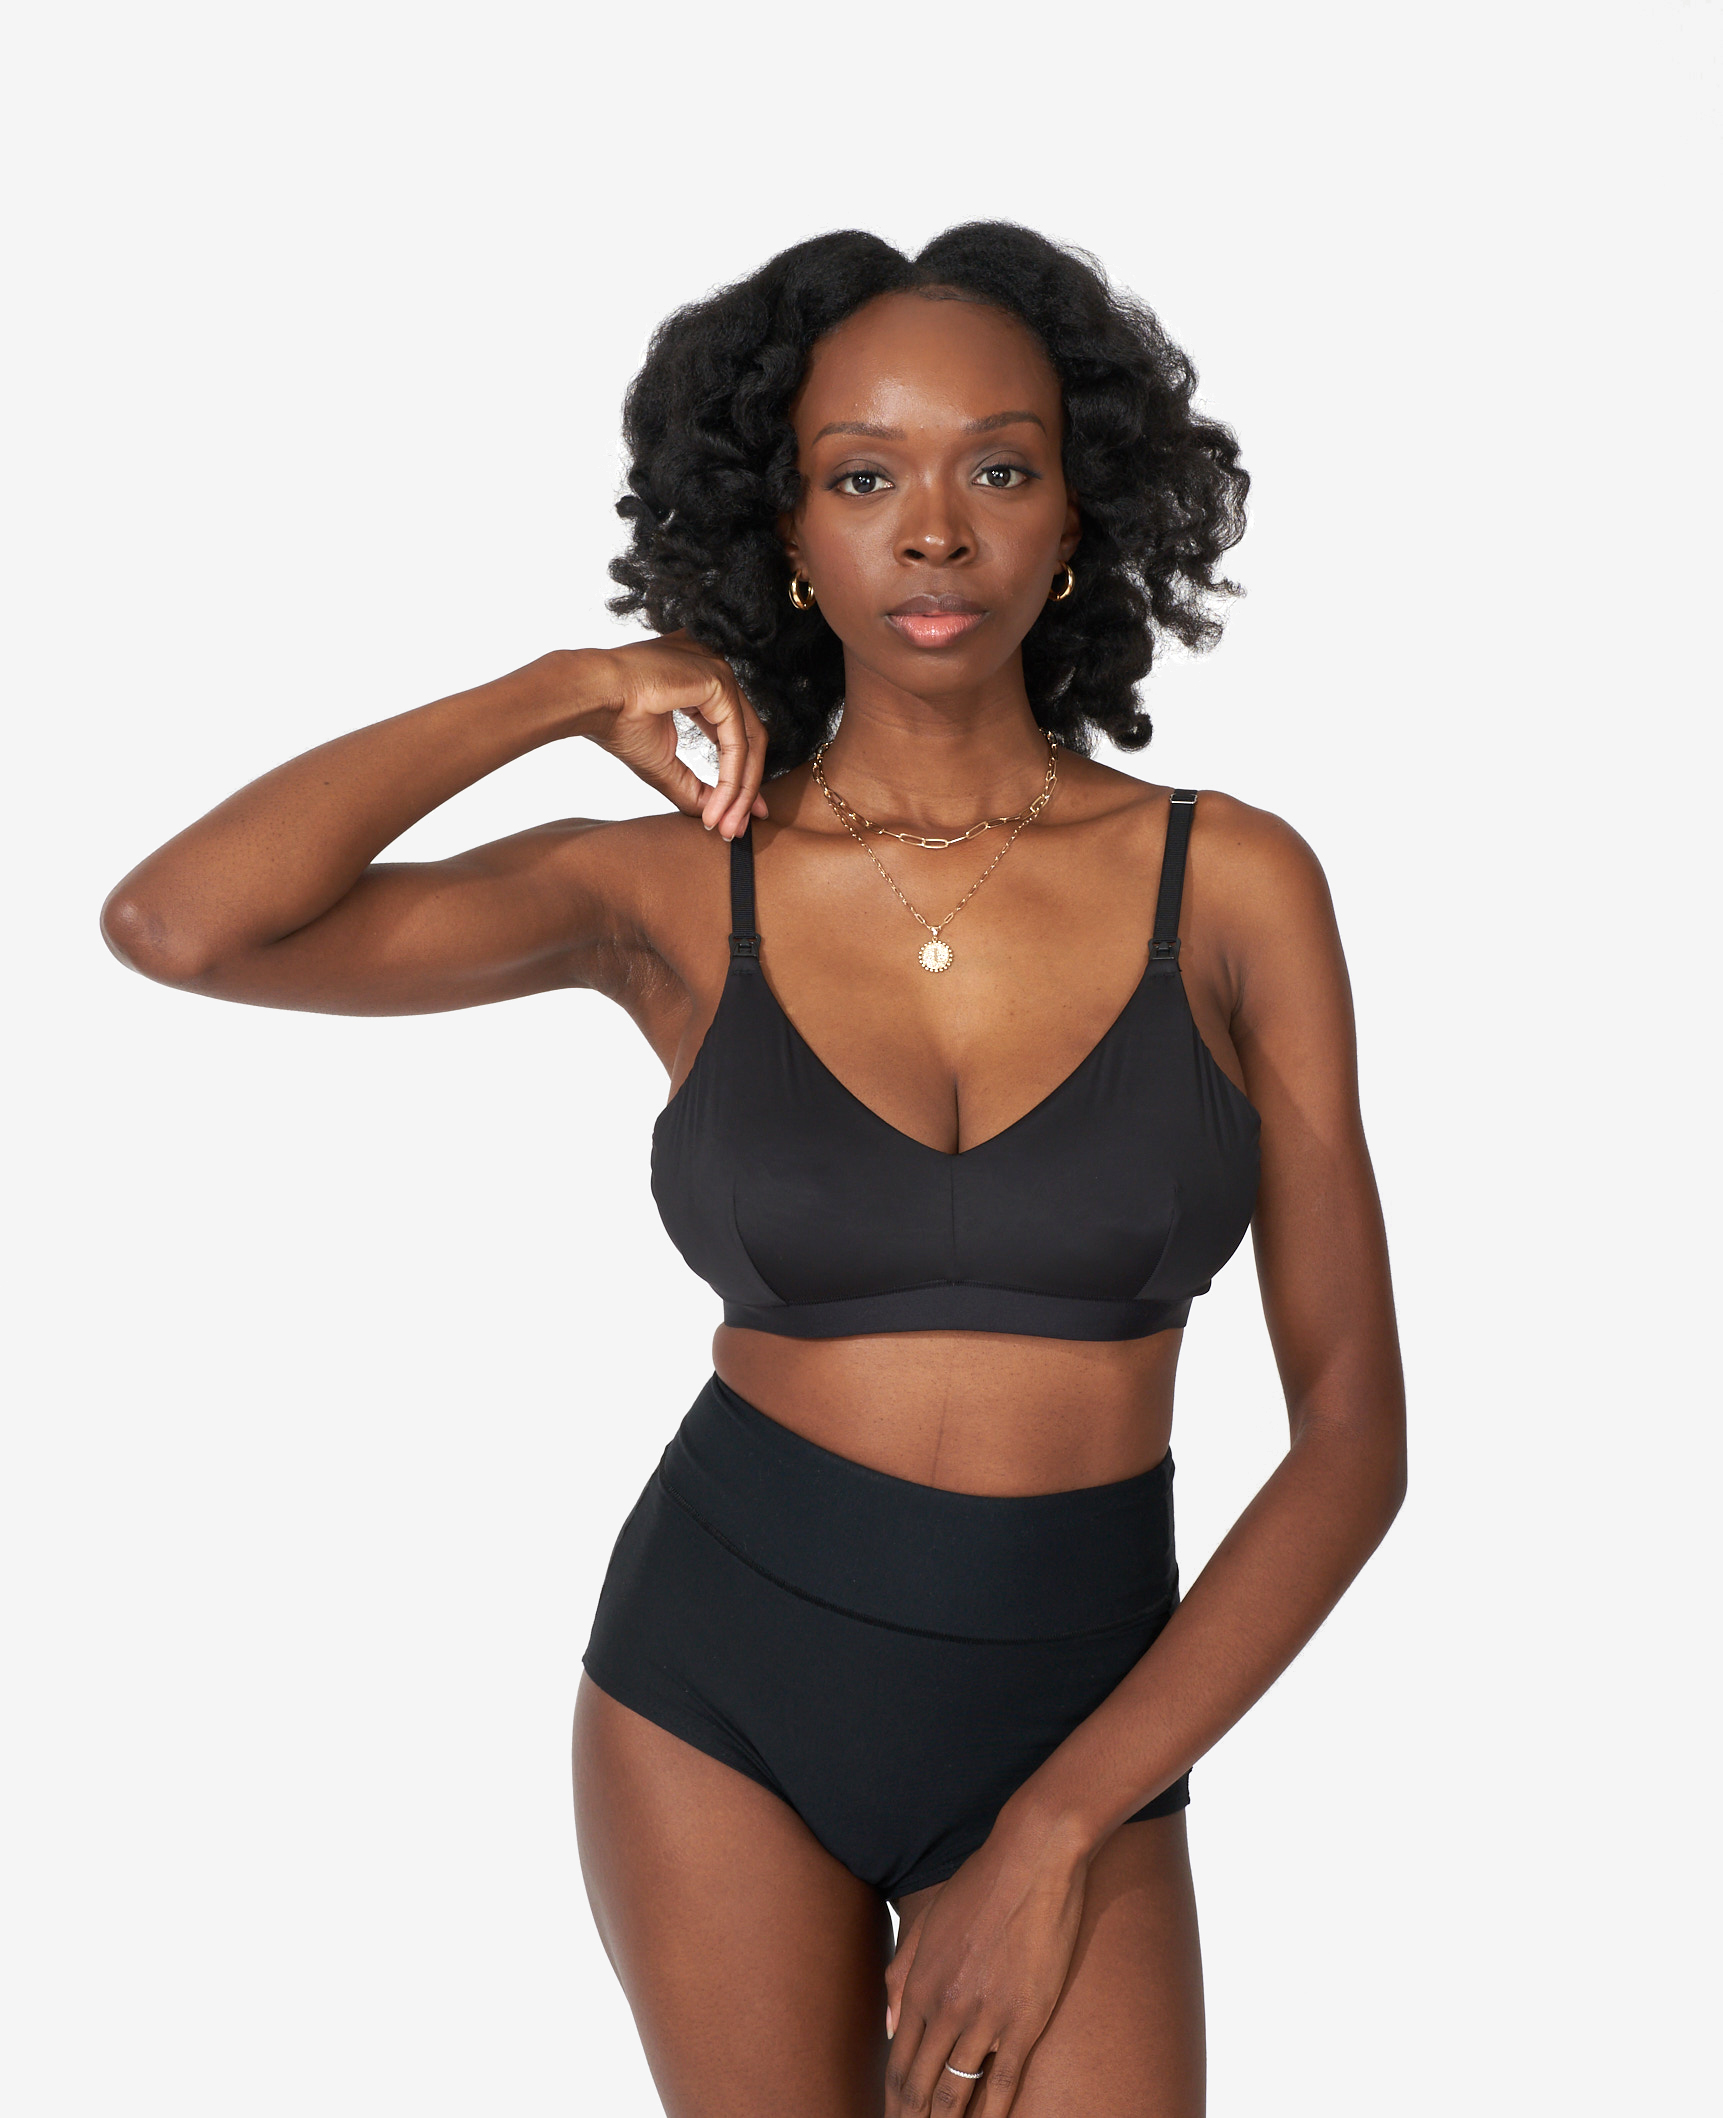 Shapee on Instagram: When it comes to choosing a nursing bra, comfort is  paramount. By prioritizing these features, you can find a comfortable nursing  bra that meets your unique needs and allows